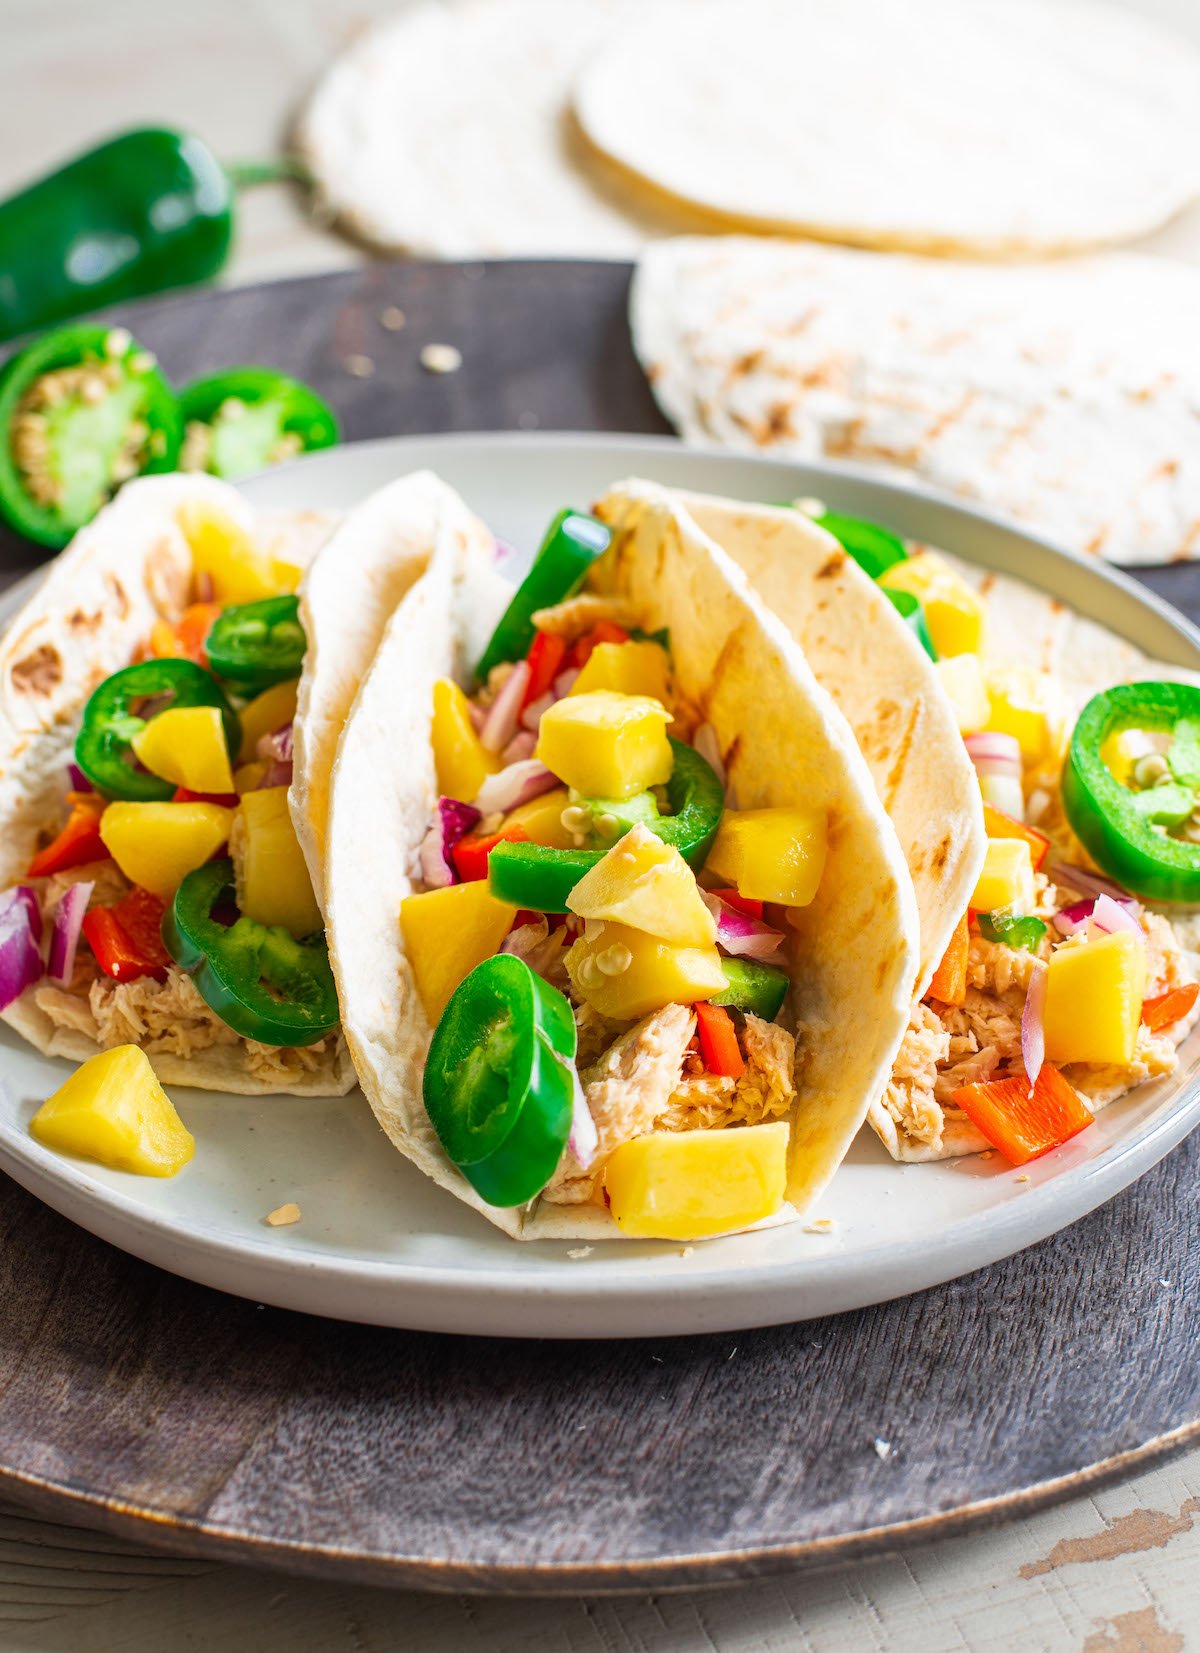 canned salmon tacos filled with mango salsa on a dark plate